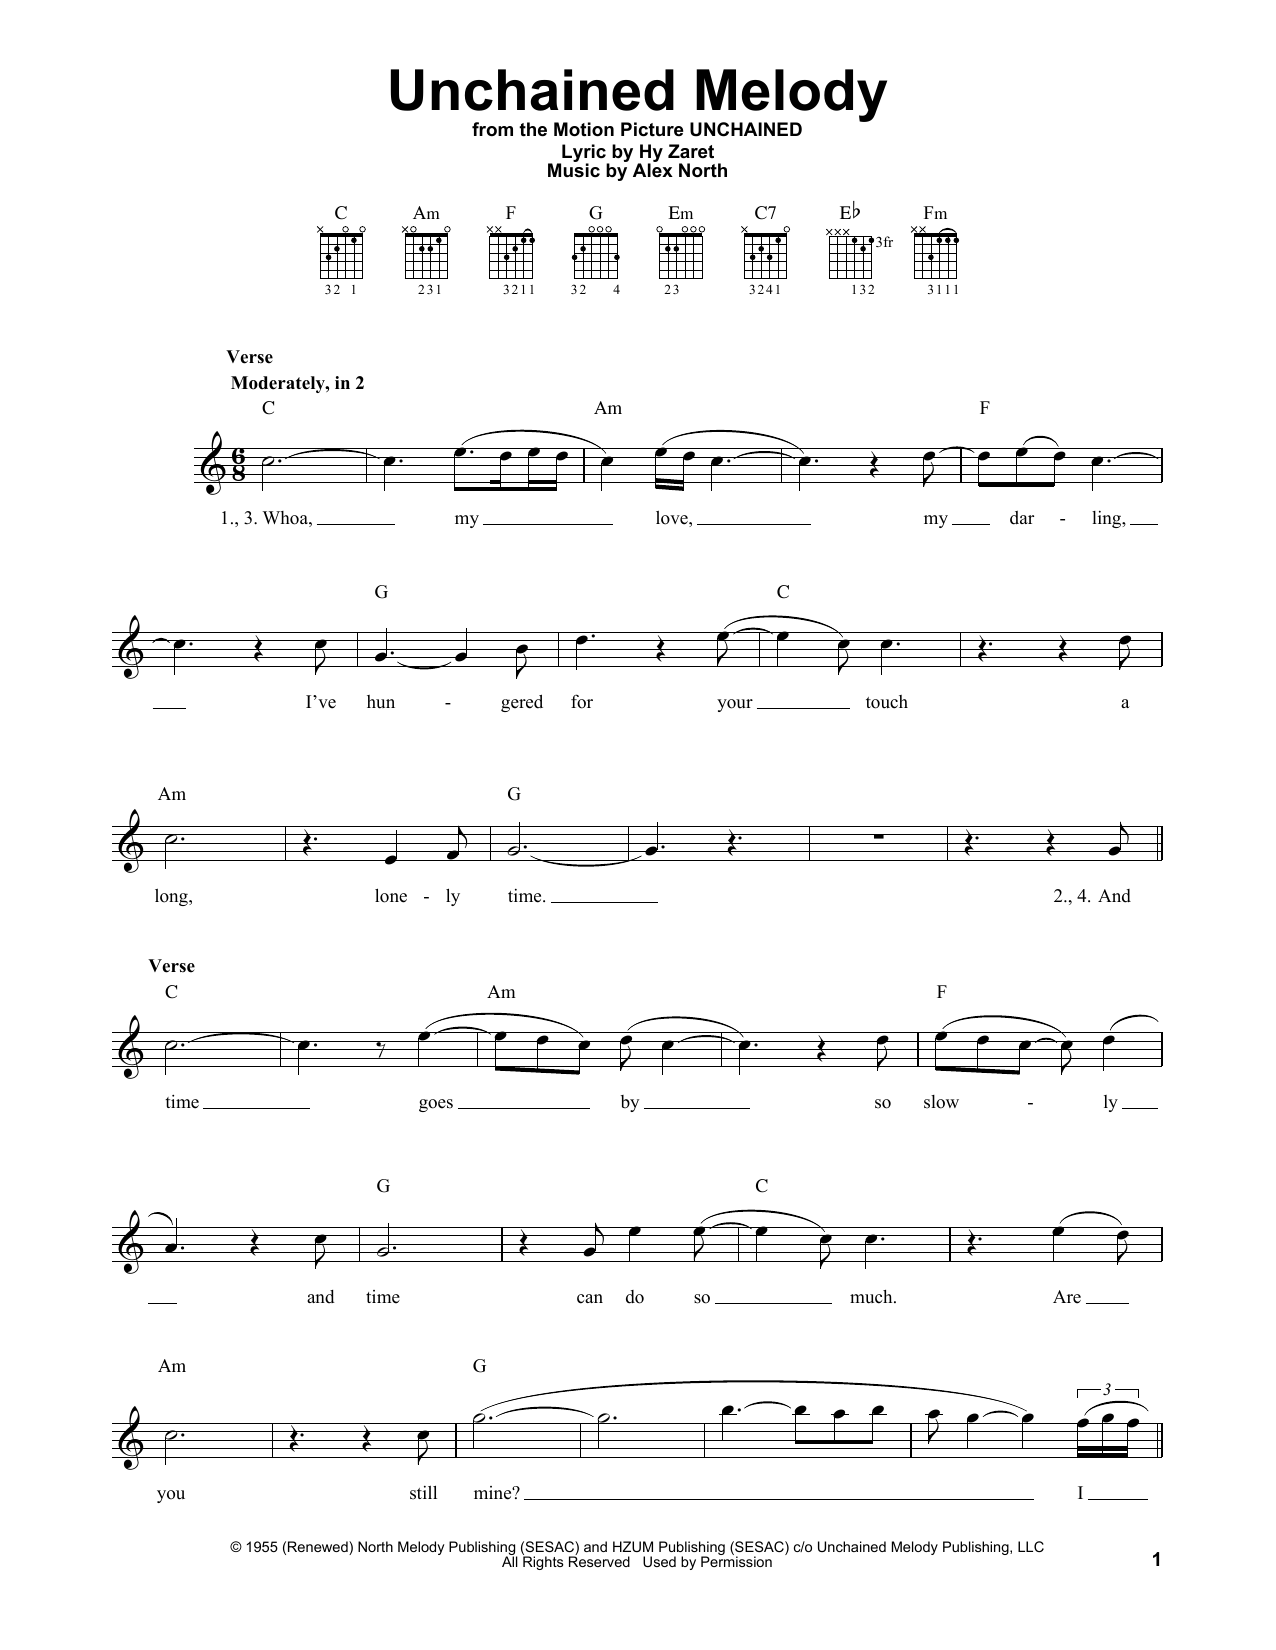 The Righteous Brothers Unchained Melody sheet music notes printable PDF score